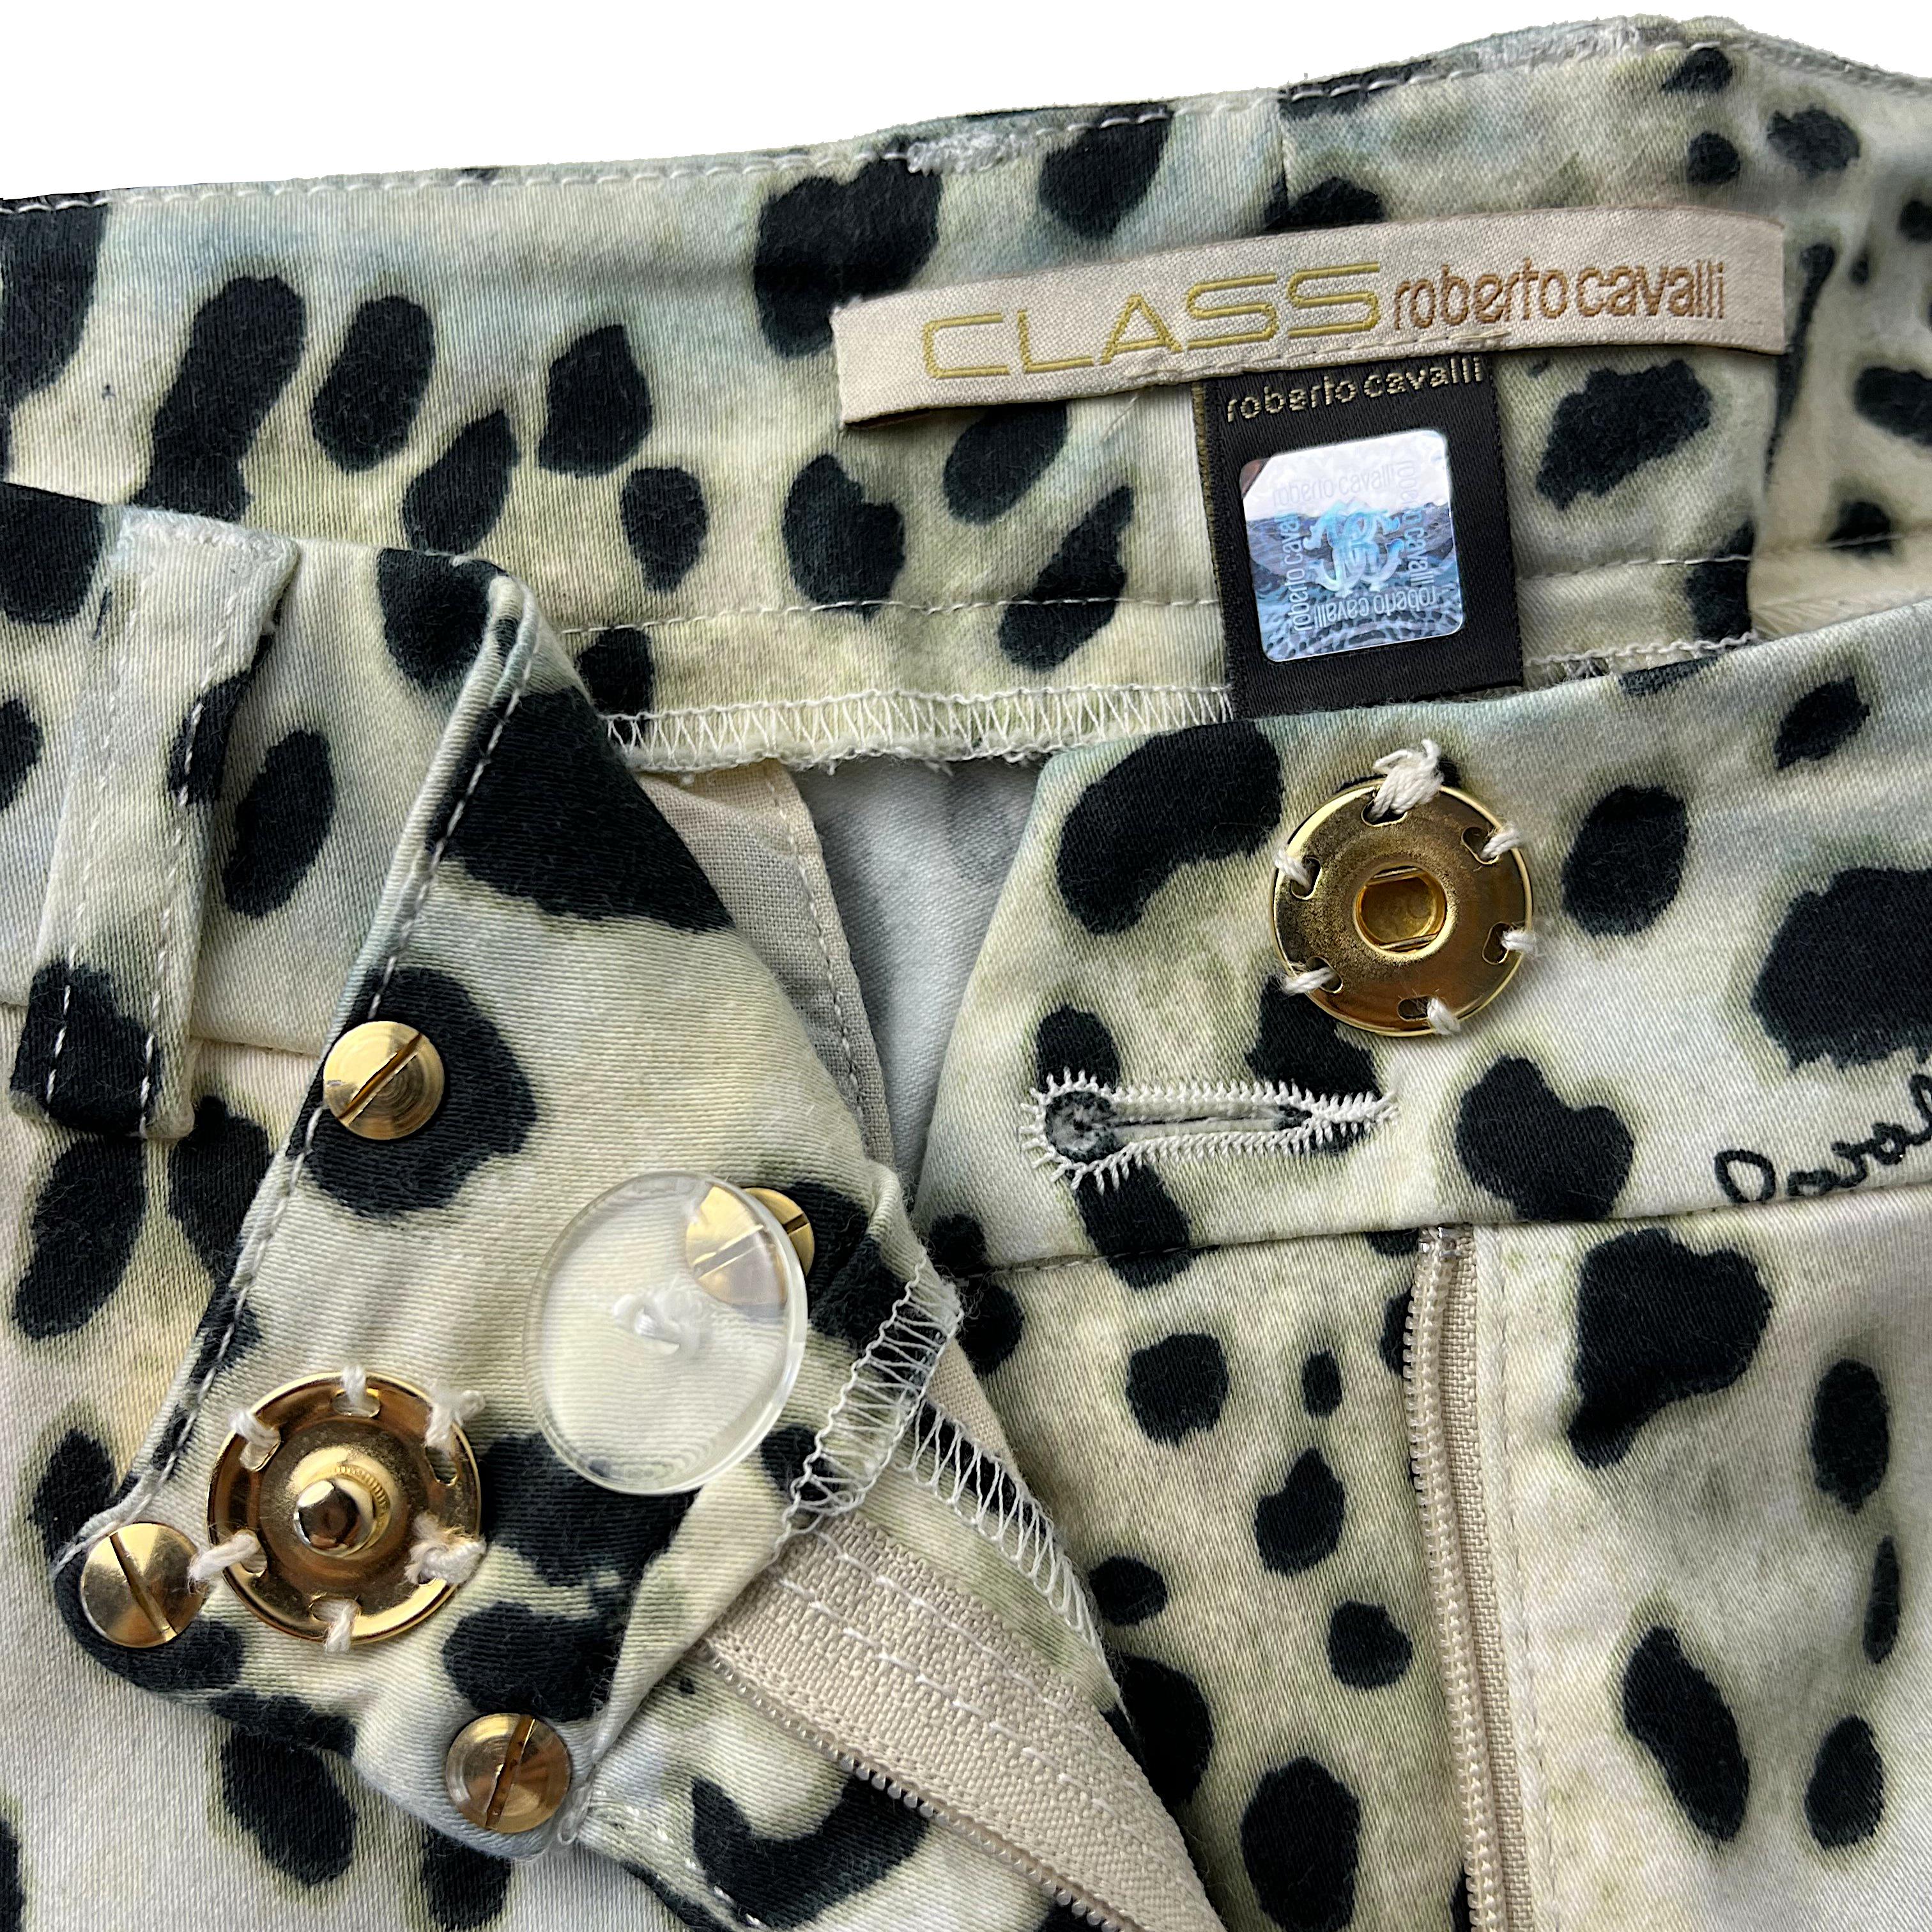 CLASS CAVALLI – 2011 Pants with Signed White Leopard Print  Size 8US 38EU 2